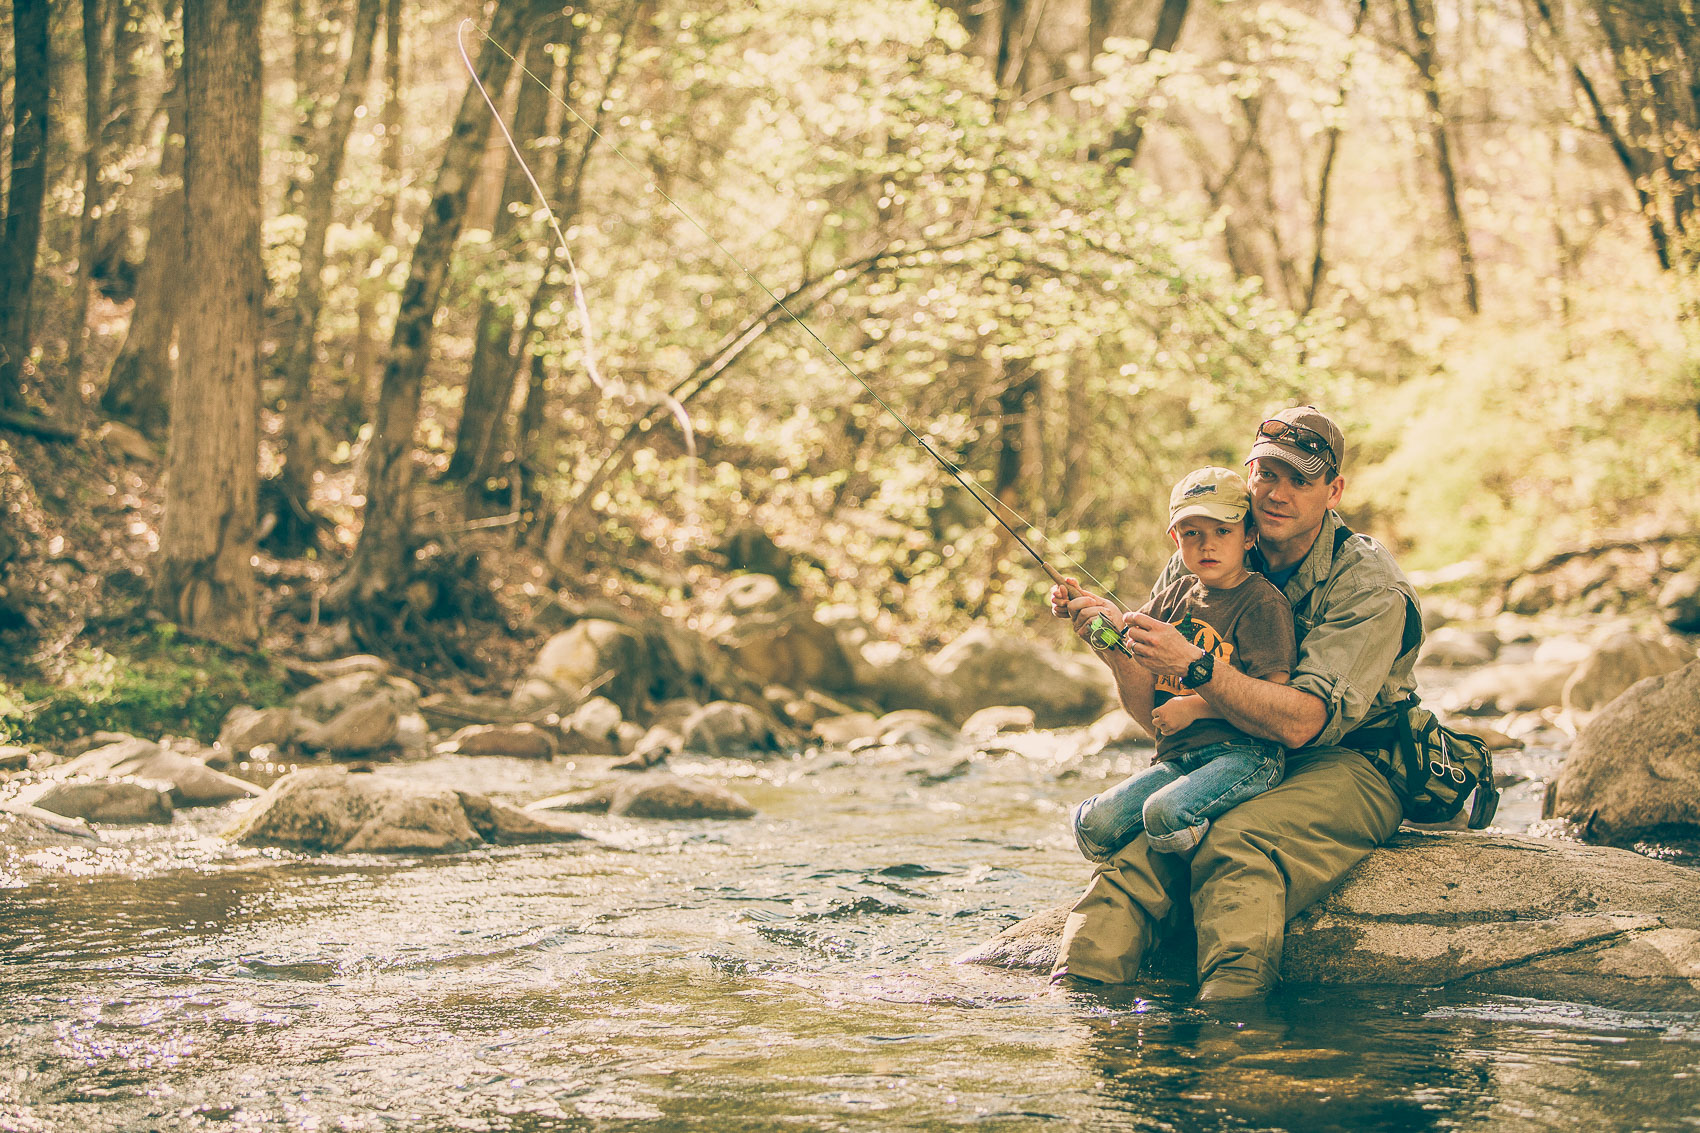 dean-roanoke-virginia-commerical-photographer-tourism-fly-fishing-13